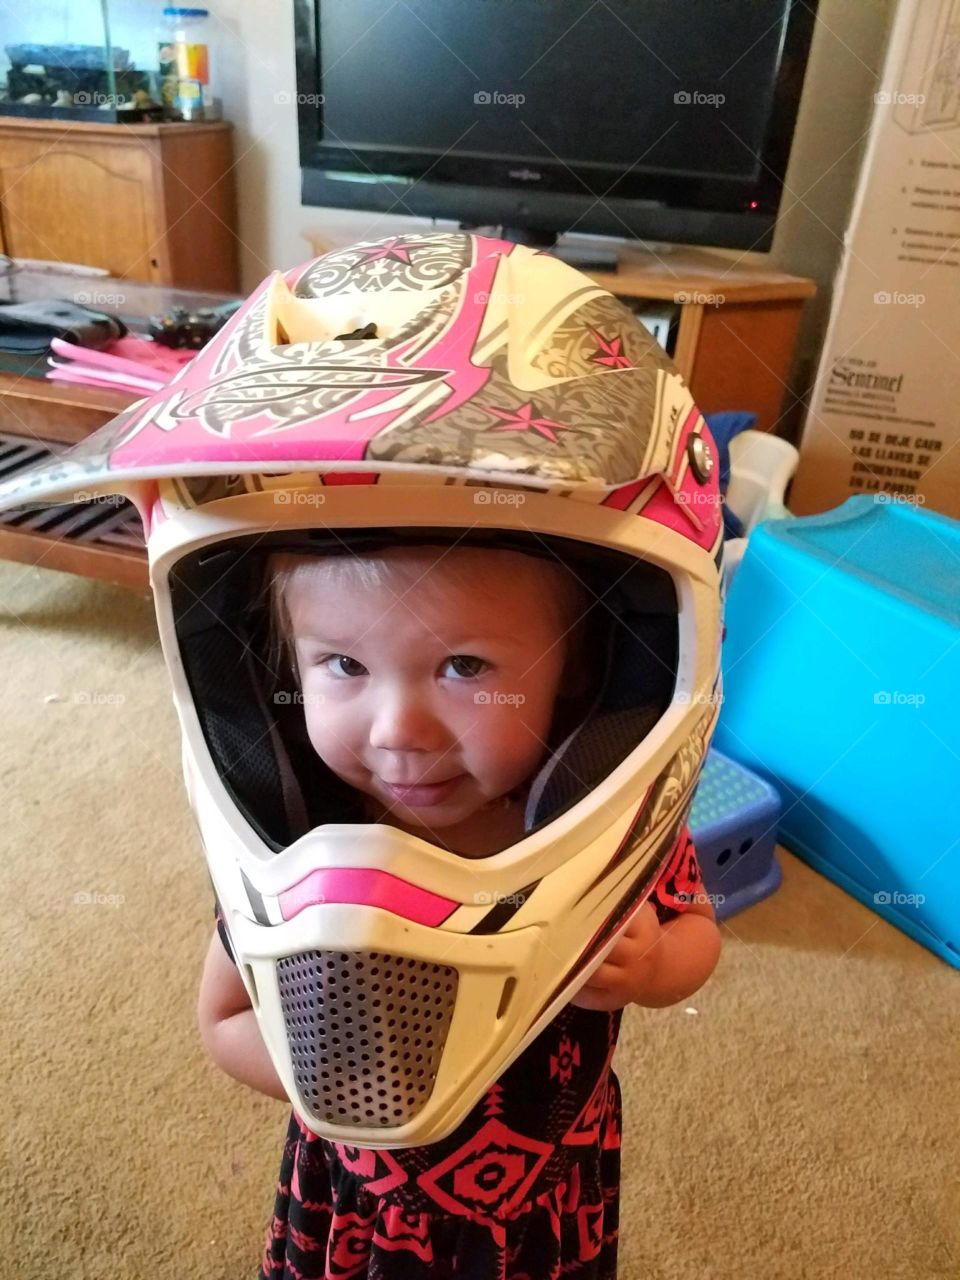 my daughter a little girl wearing a helmet that's way too big but it's super cute in Ely Nevada United States of America 2017